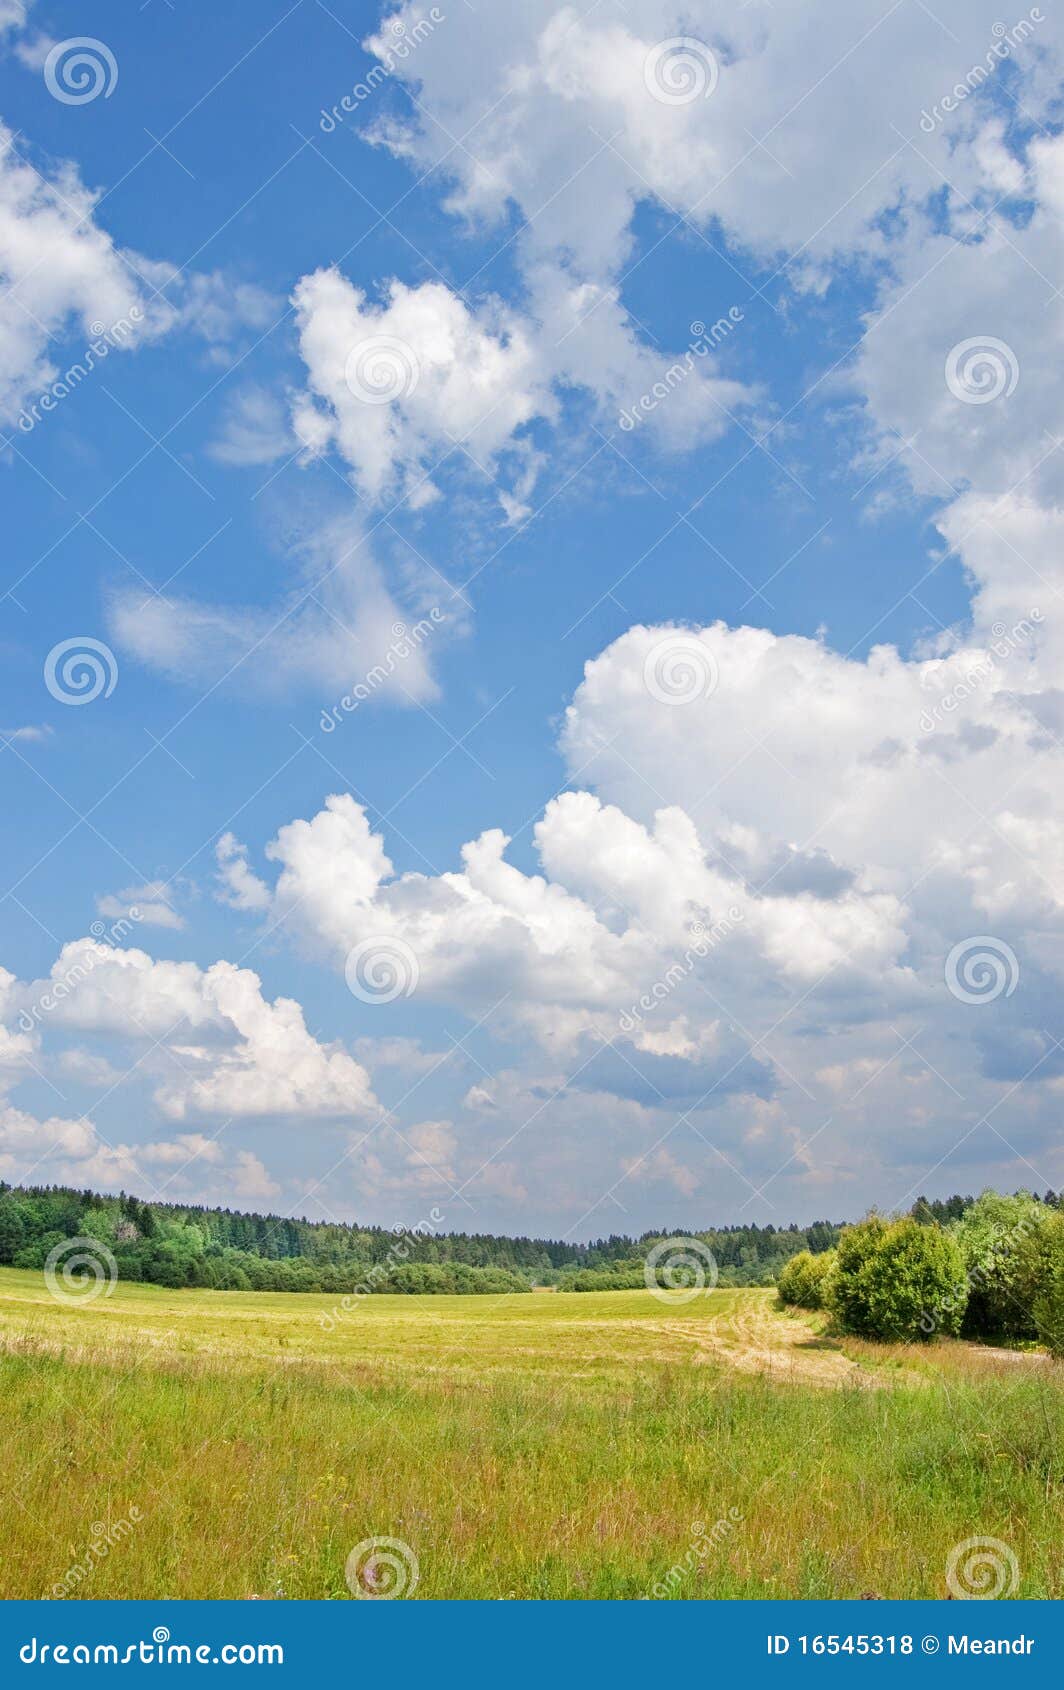 Field and wood. Yellow field with the burnt out grass against green wood and the blue sky with white clouds